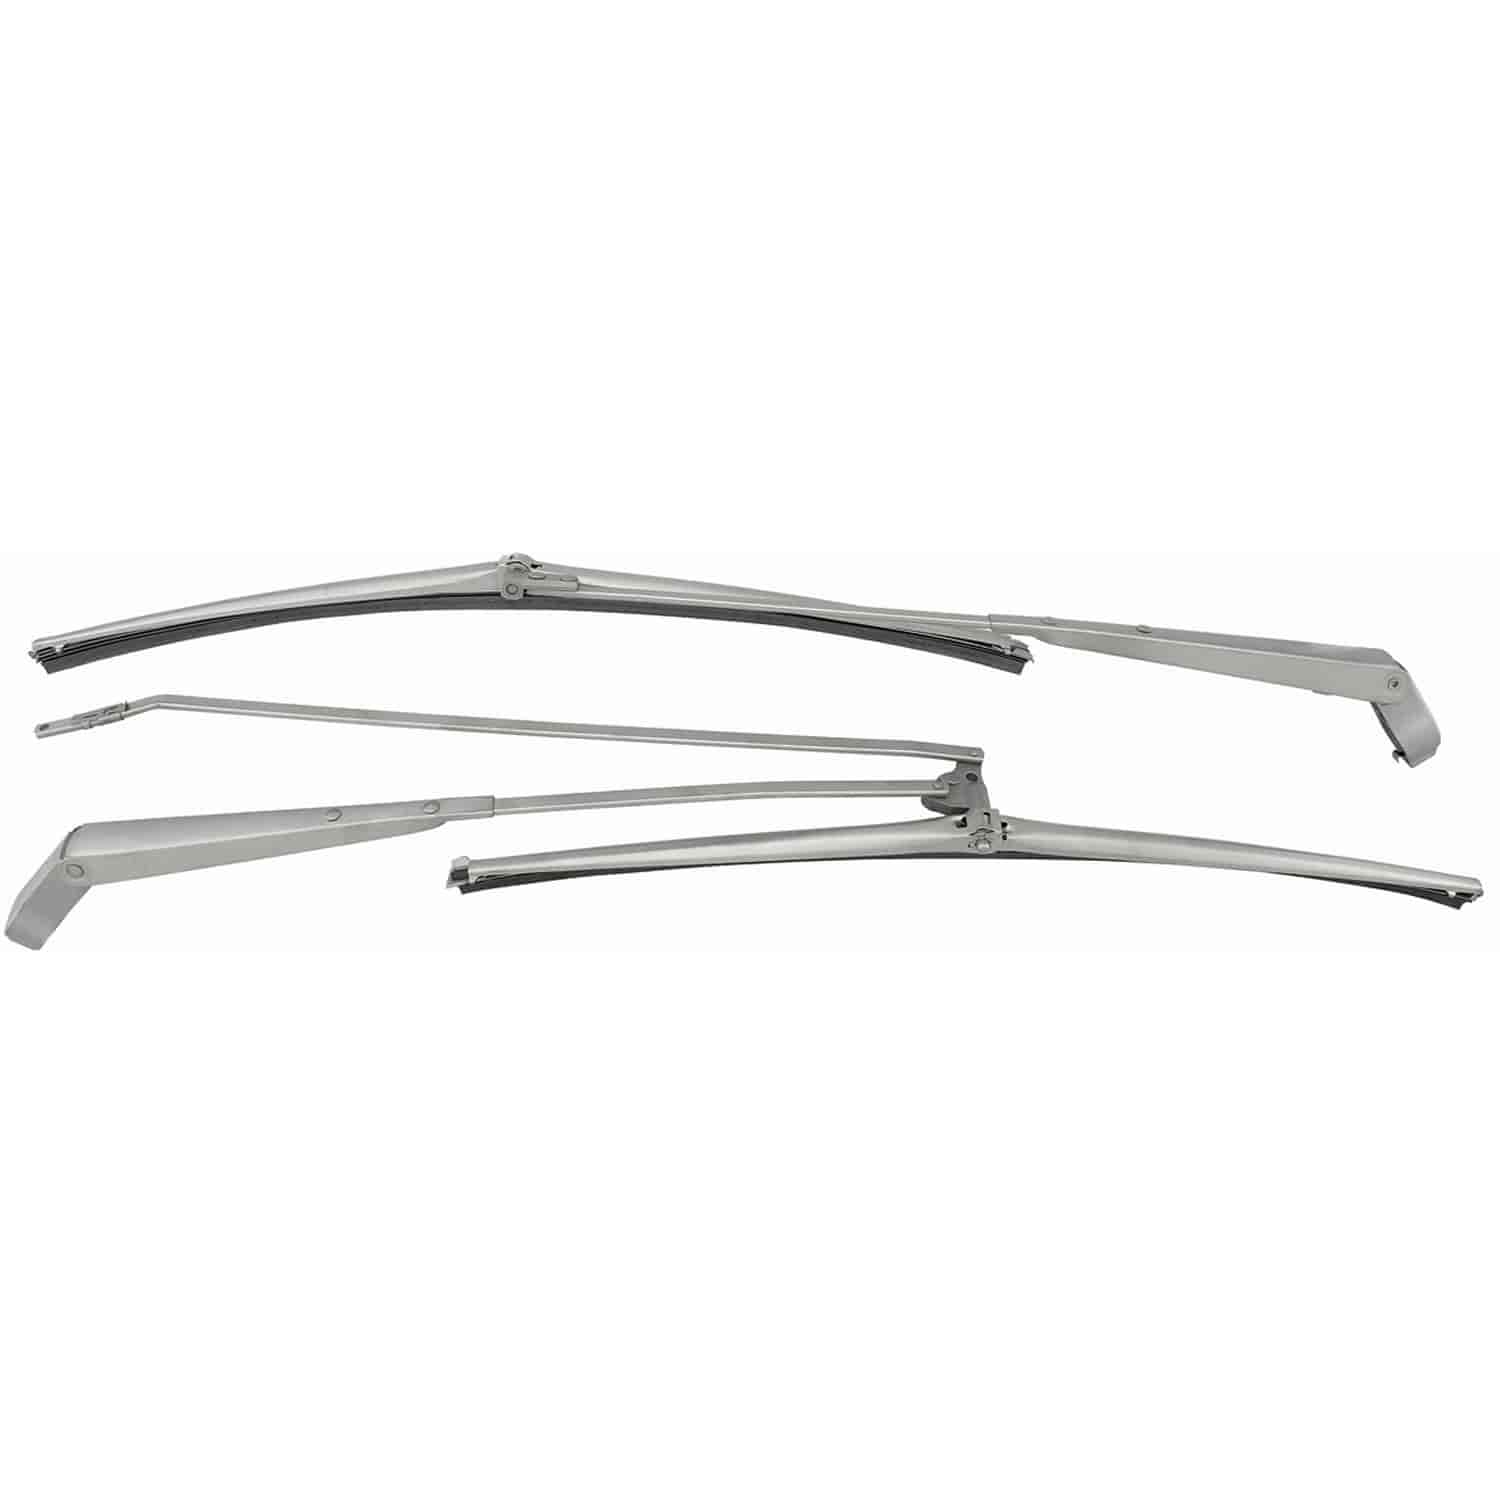 CH23638 Windshield Wiper Arms & Blades for 1968-1972 GM A-Body